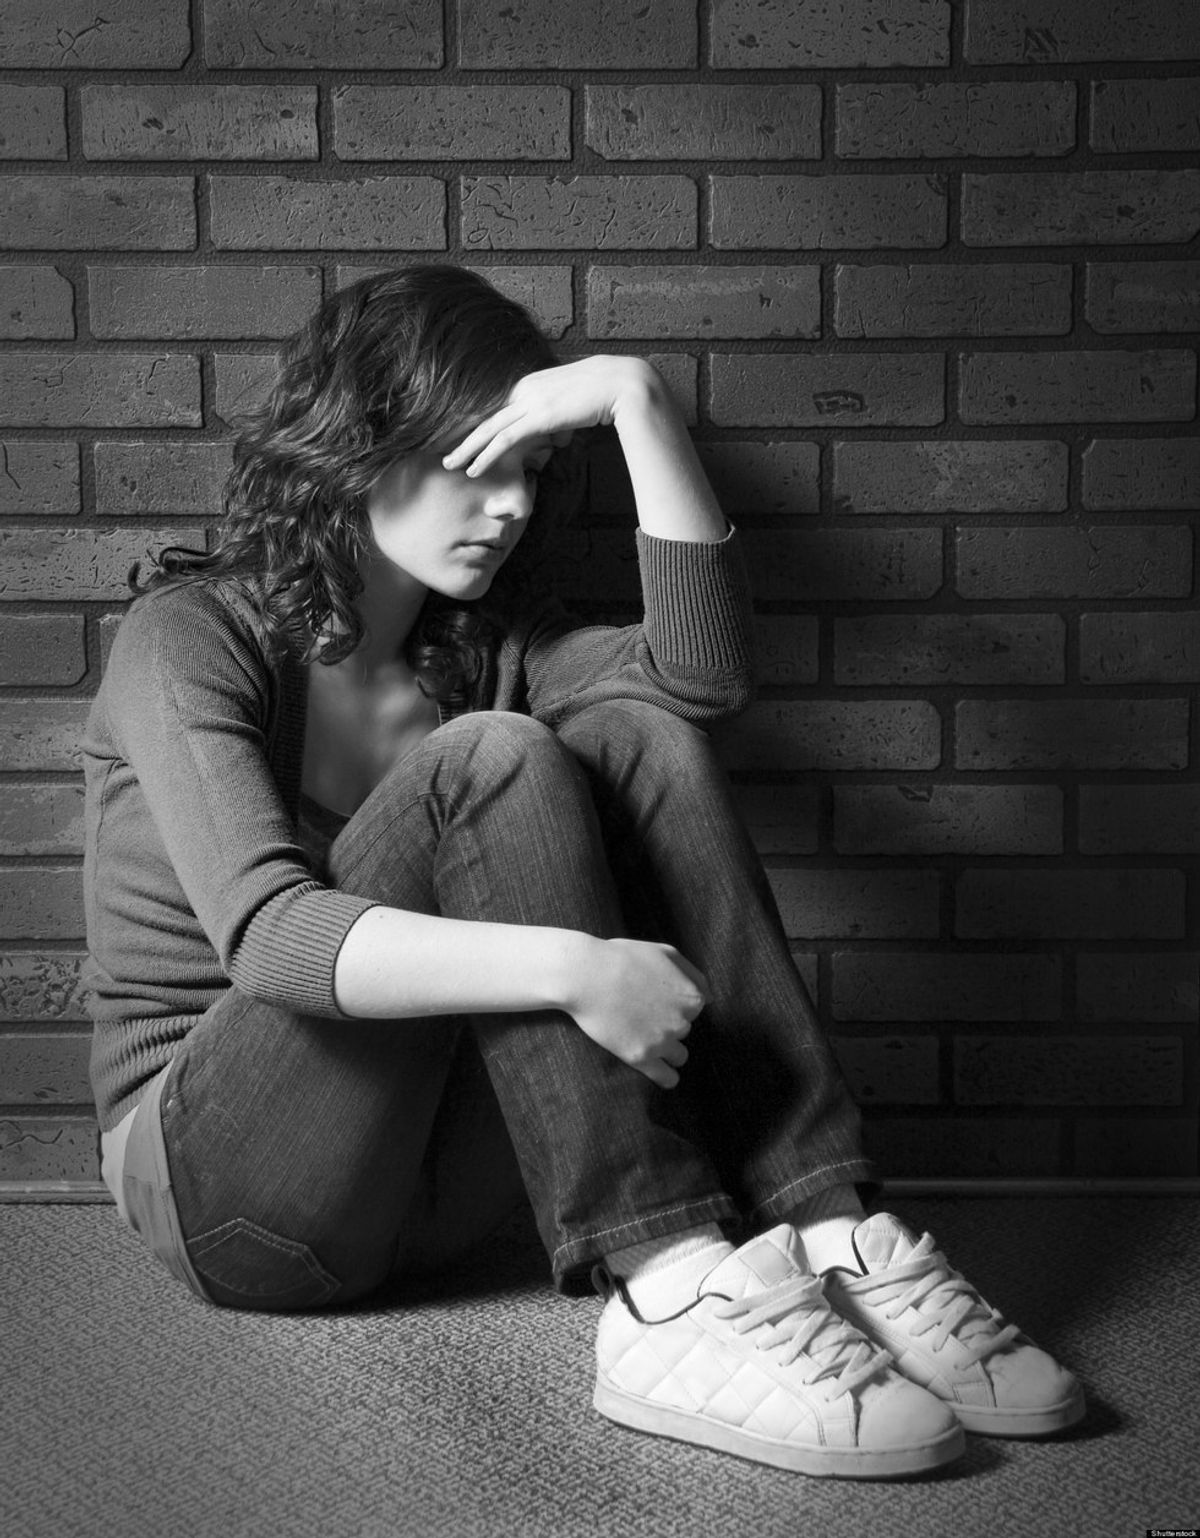 Why Is There An Increasing Number Of Children Committing Suicide?